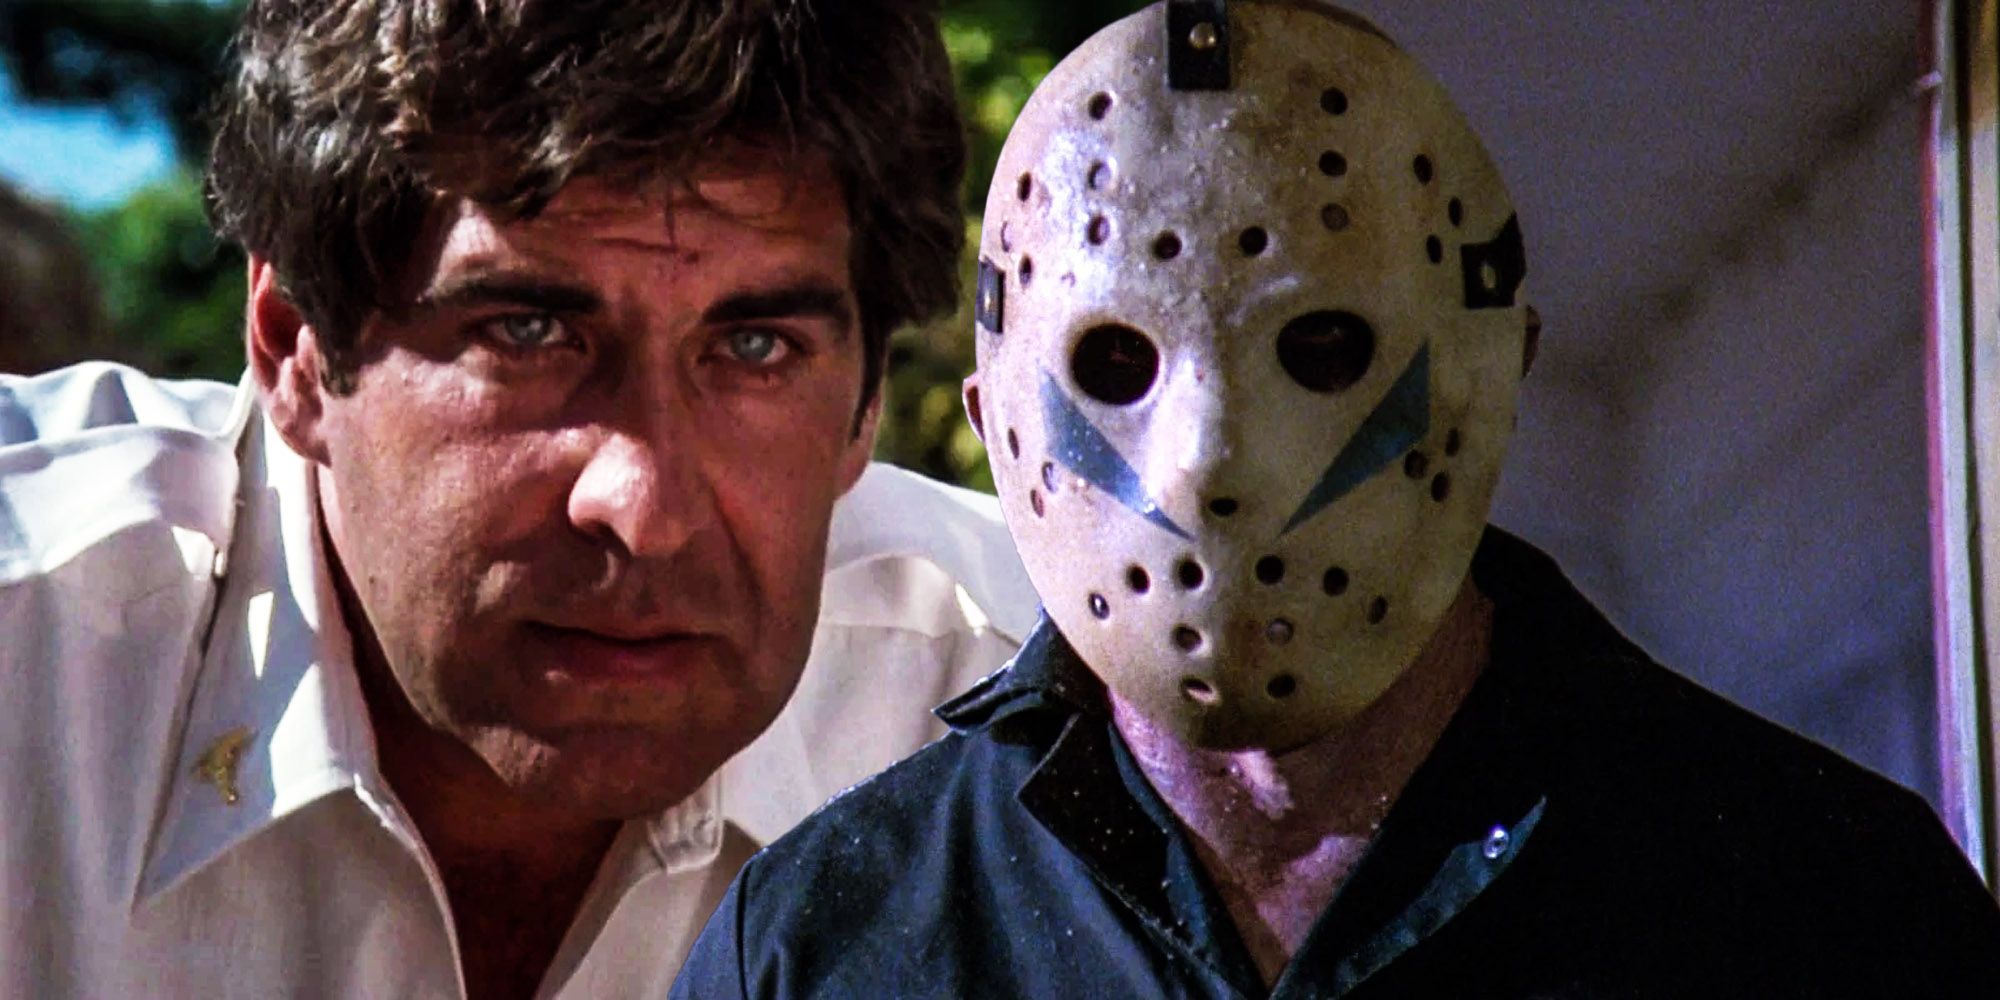 Every Slasher Trend The Friday the 13th Franchise Followed